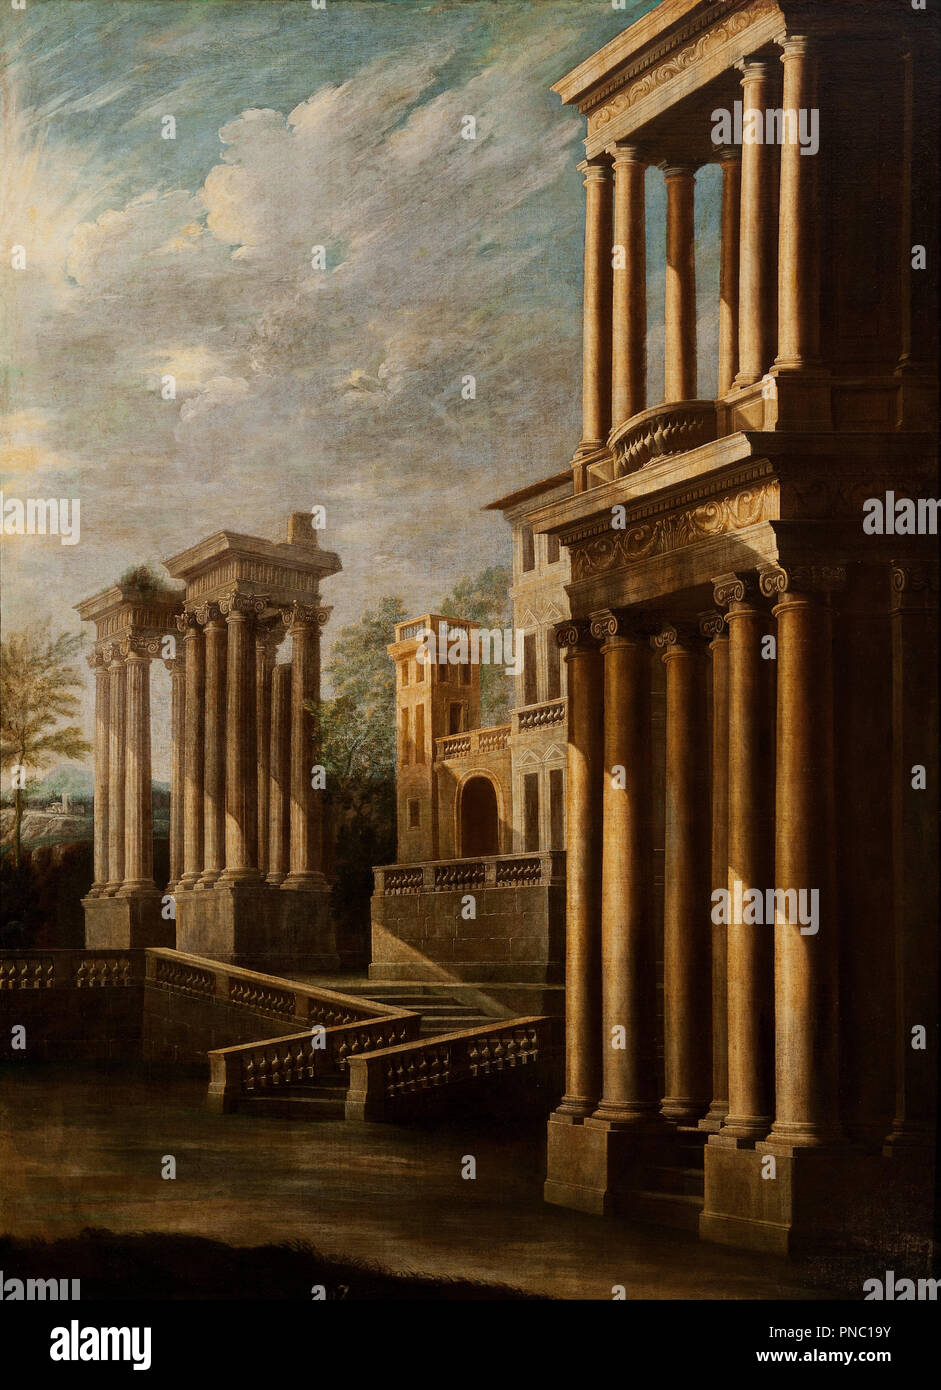 Exterior View of Buildings. Date/Period: 1700 - 1730. Painting. Oil on canvas. Height: 2,100 mm (82.67 in); Width: 1,520 mm (59.84 in). Author: LEONARDO COCCORANTE. COCCORANTE, LEONARDO. Stock Photo